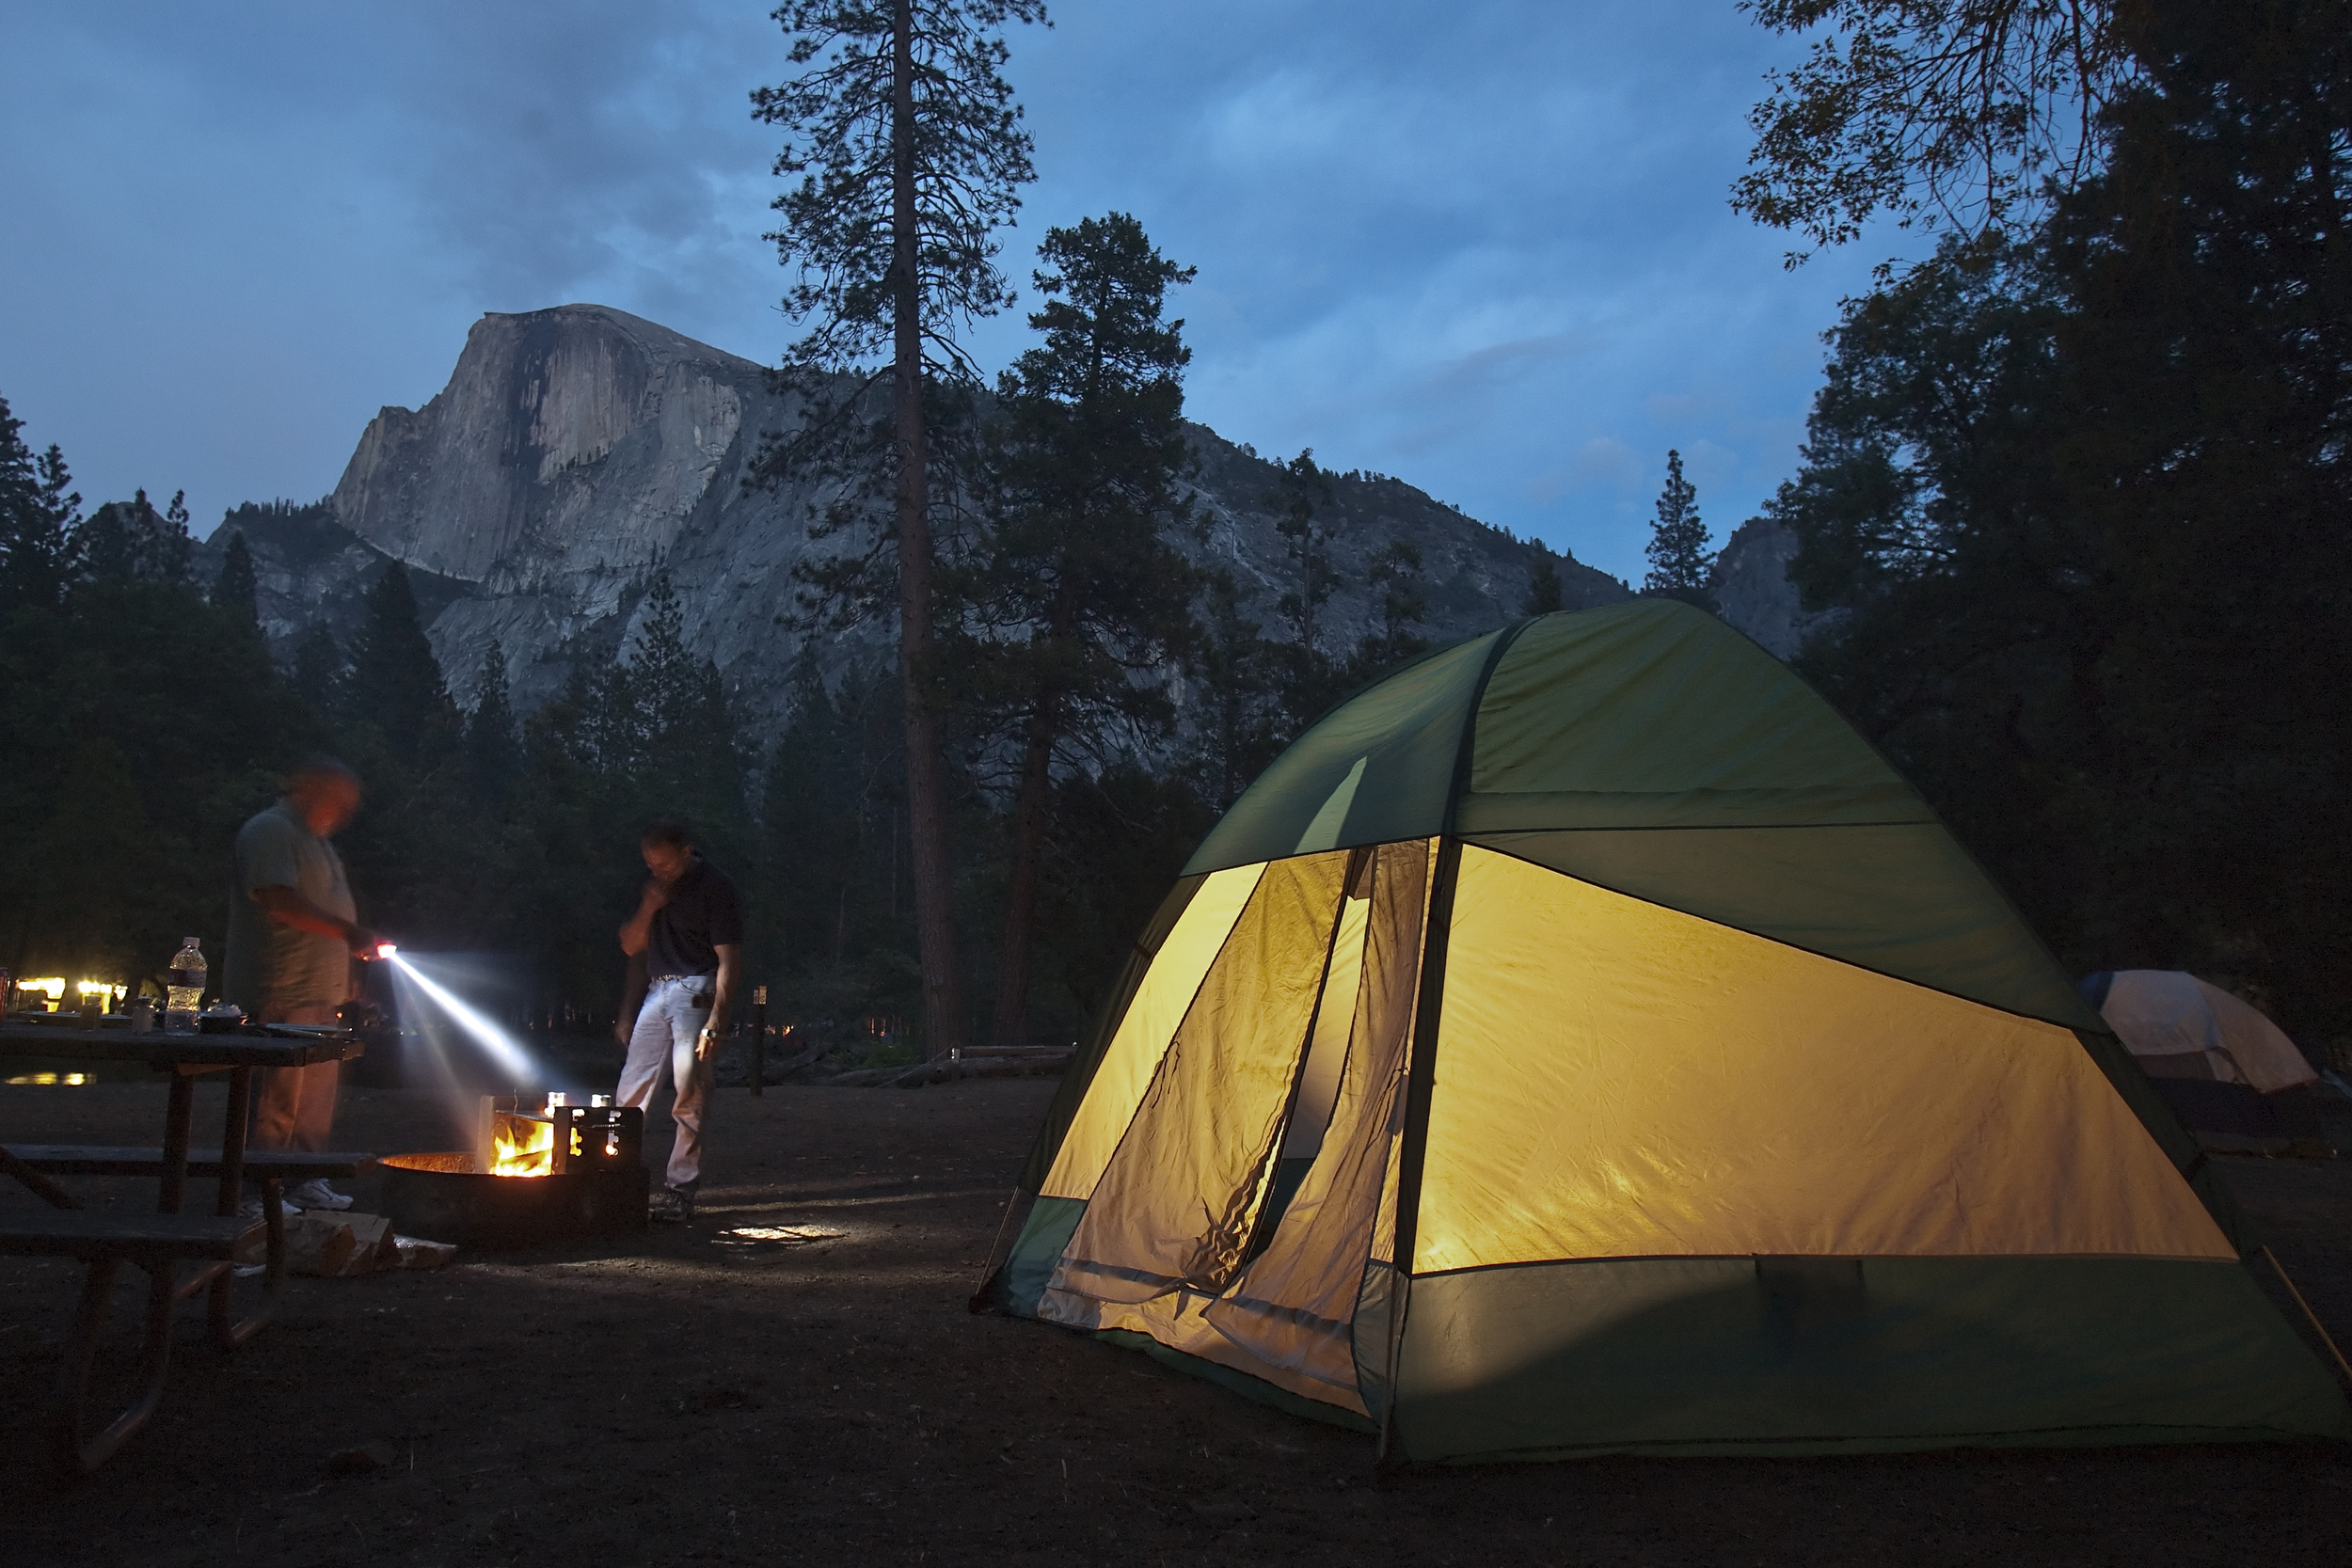   Camp site with a view, Half Dome - Yosemite National Park  